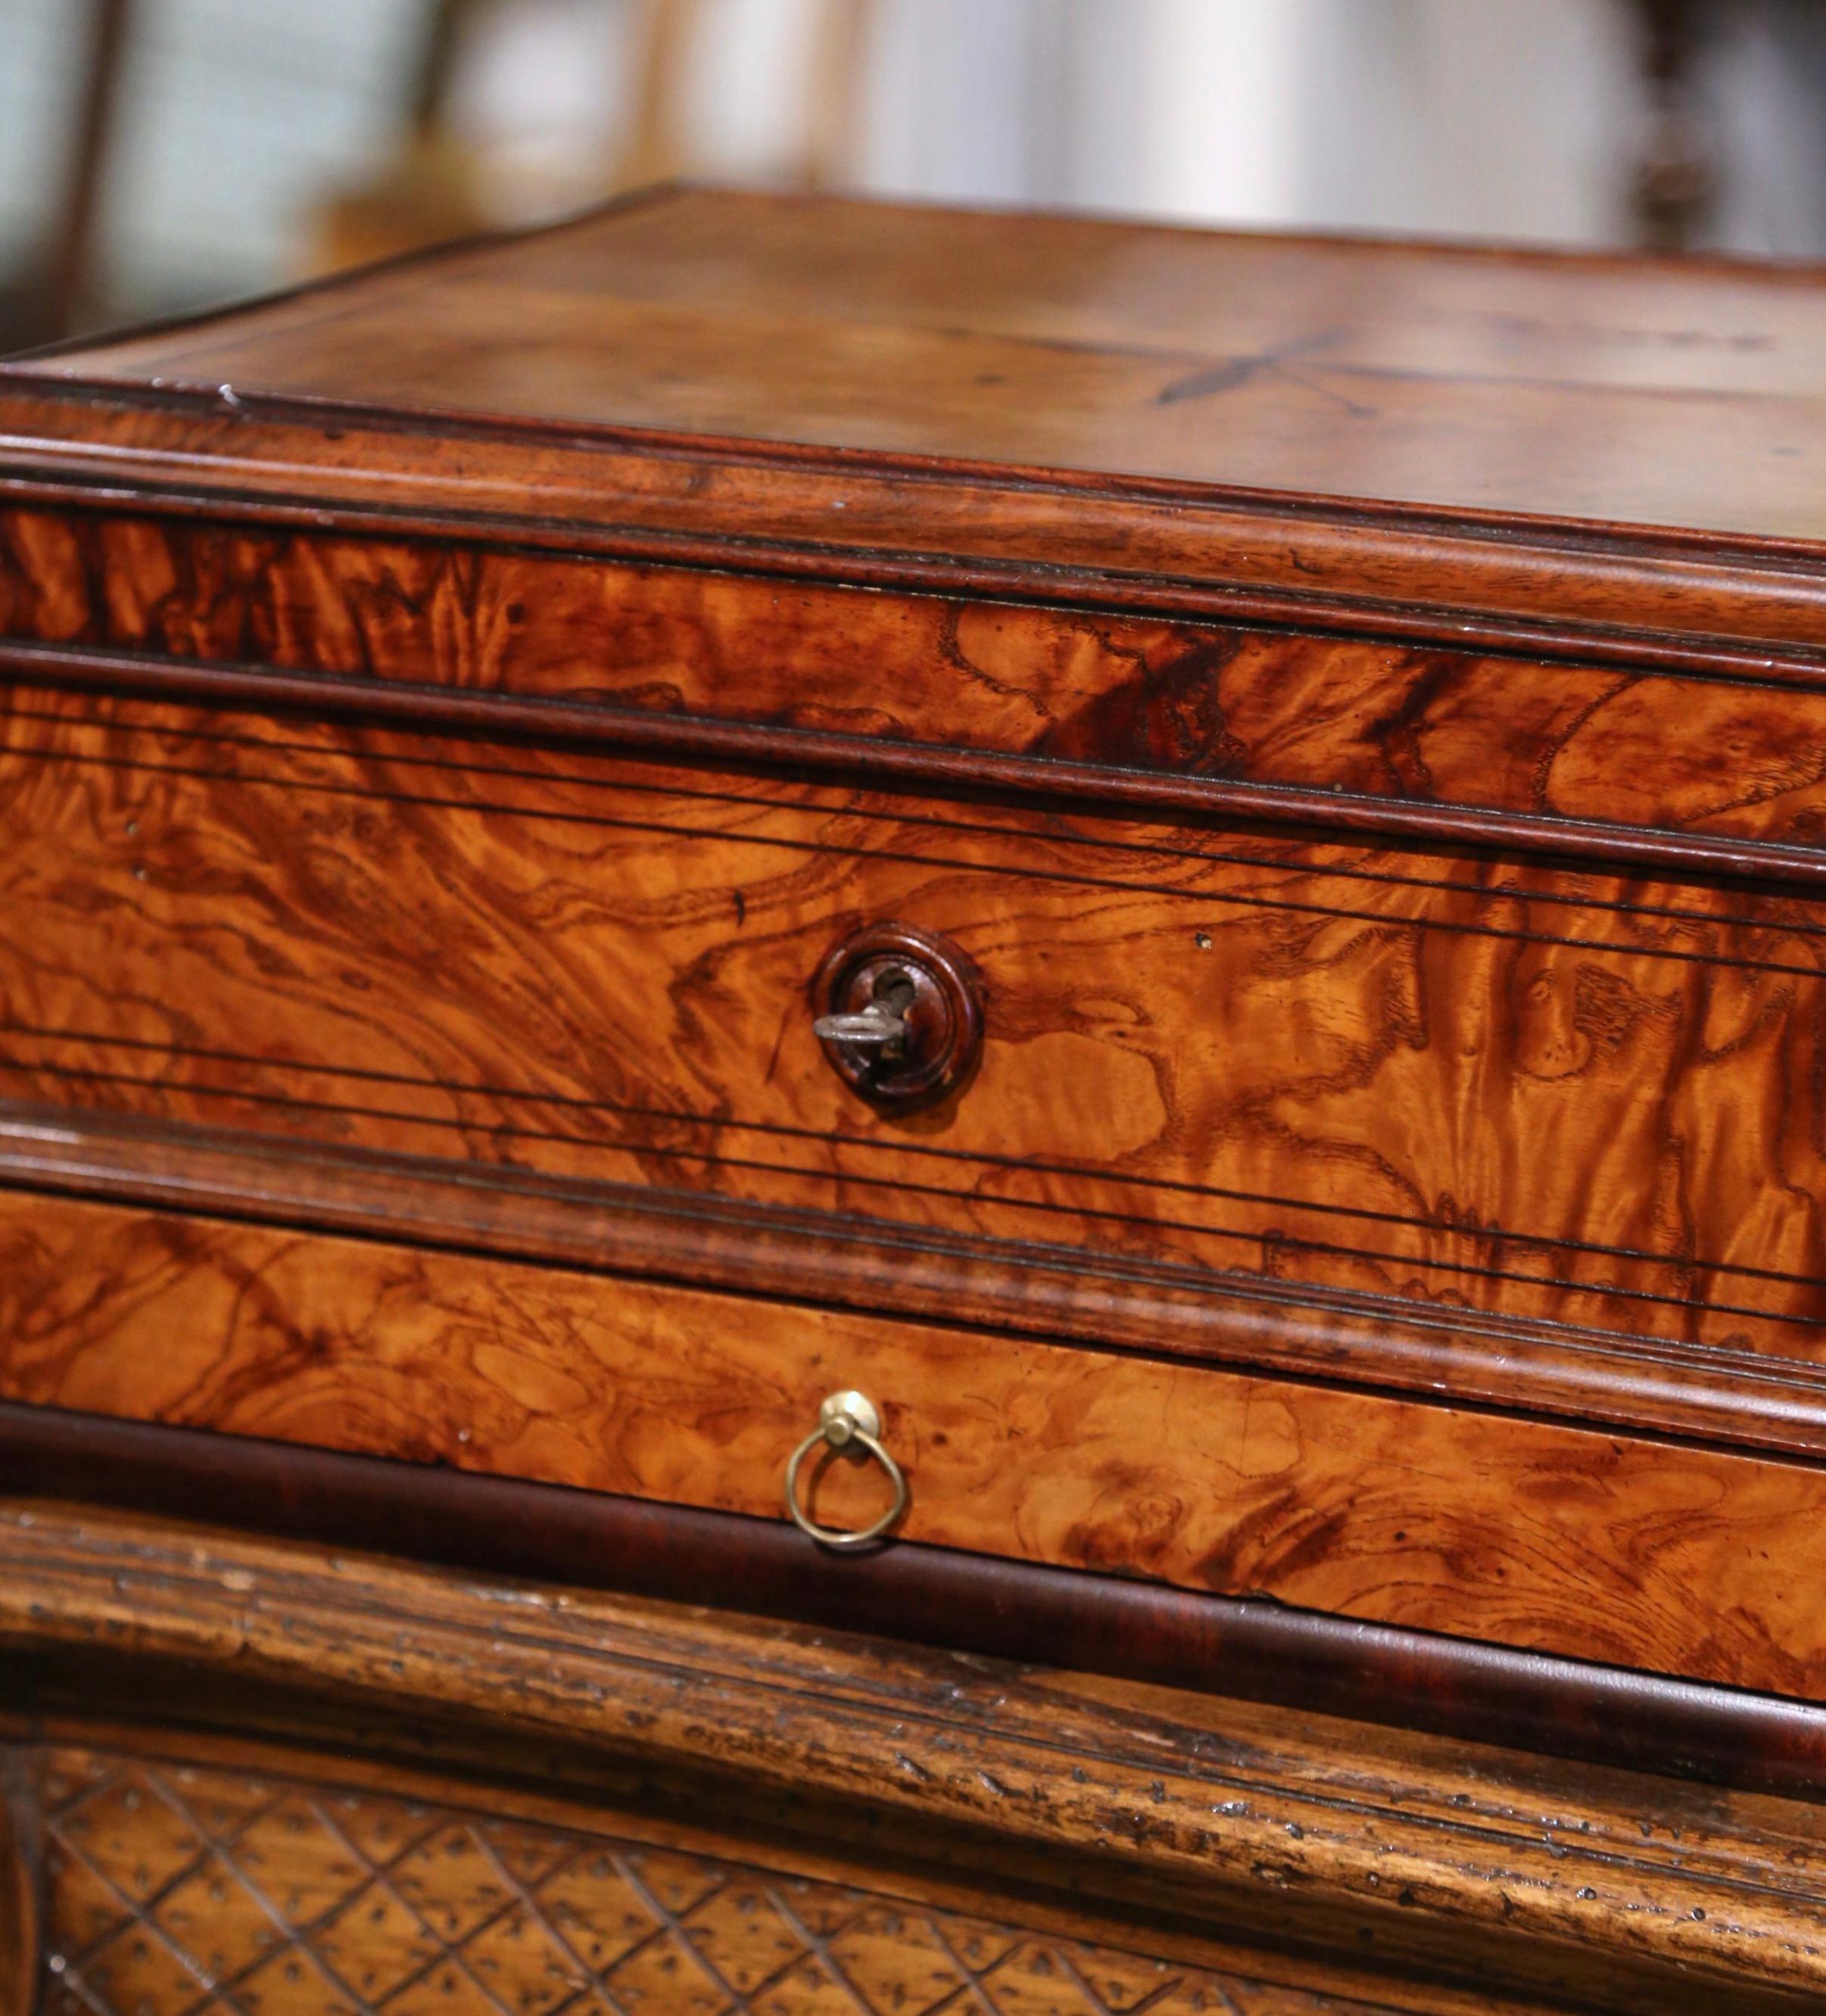 19th Century French Burl Elm Inlaid Jewelry Box with Drawer & Inside Mirror In Excellent Condition For Sale In Dallas, TX